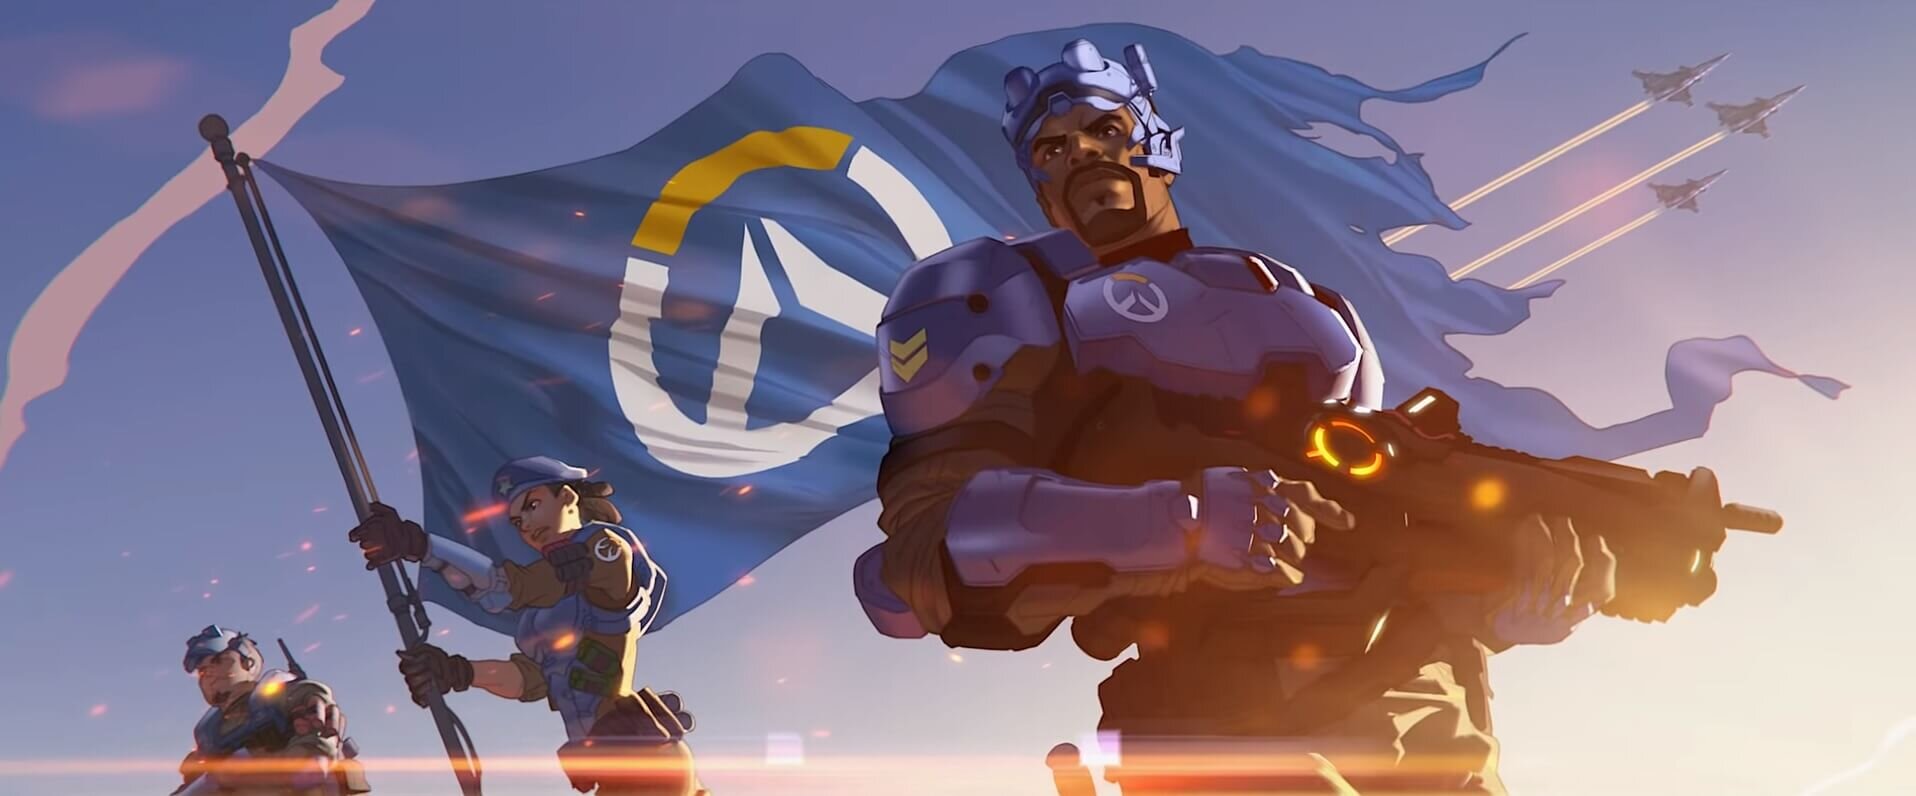 Overwatch 2 Mid-Season Update - November 15: Full Patch Notes